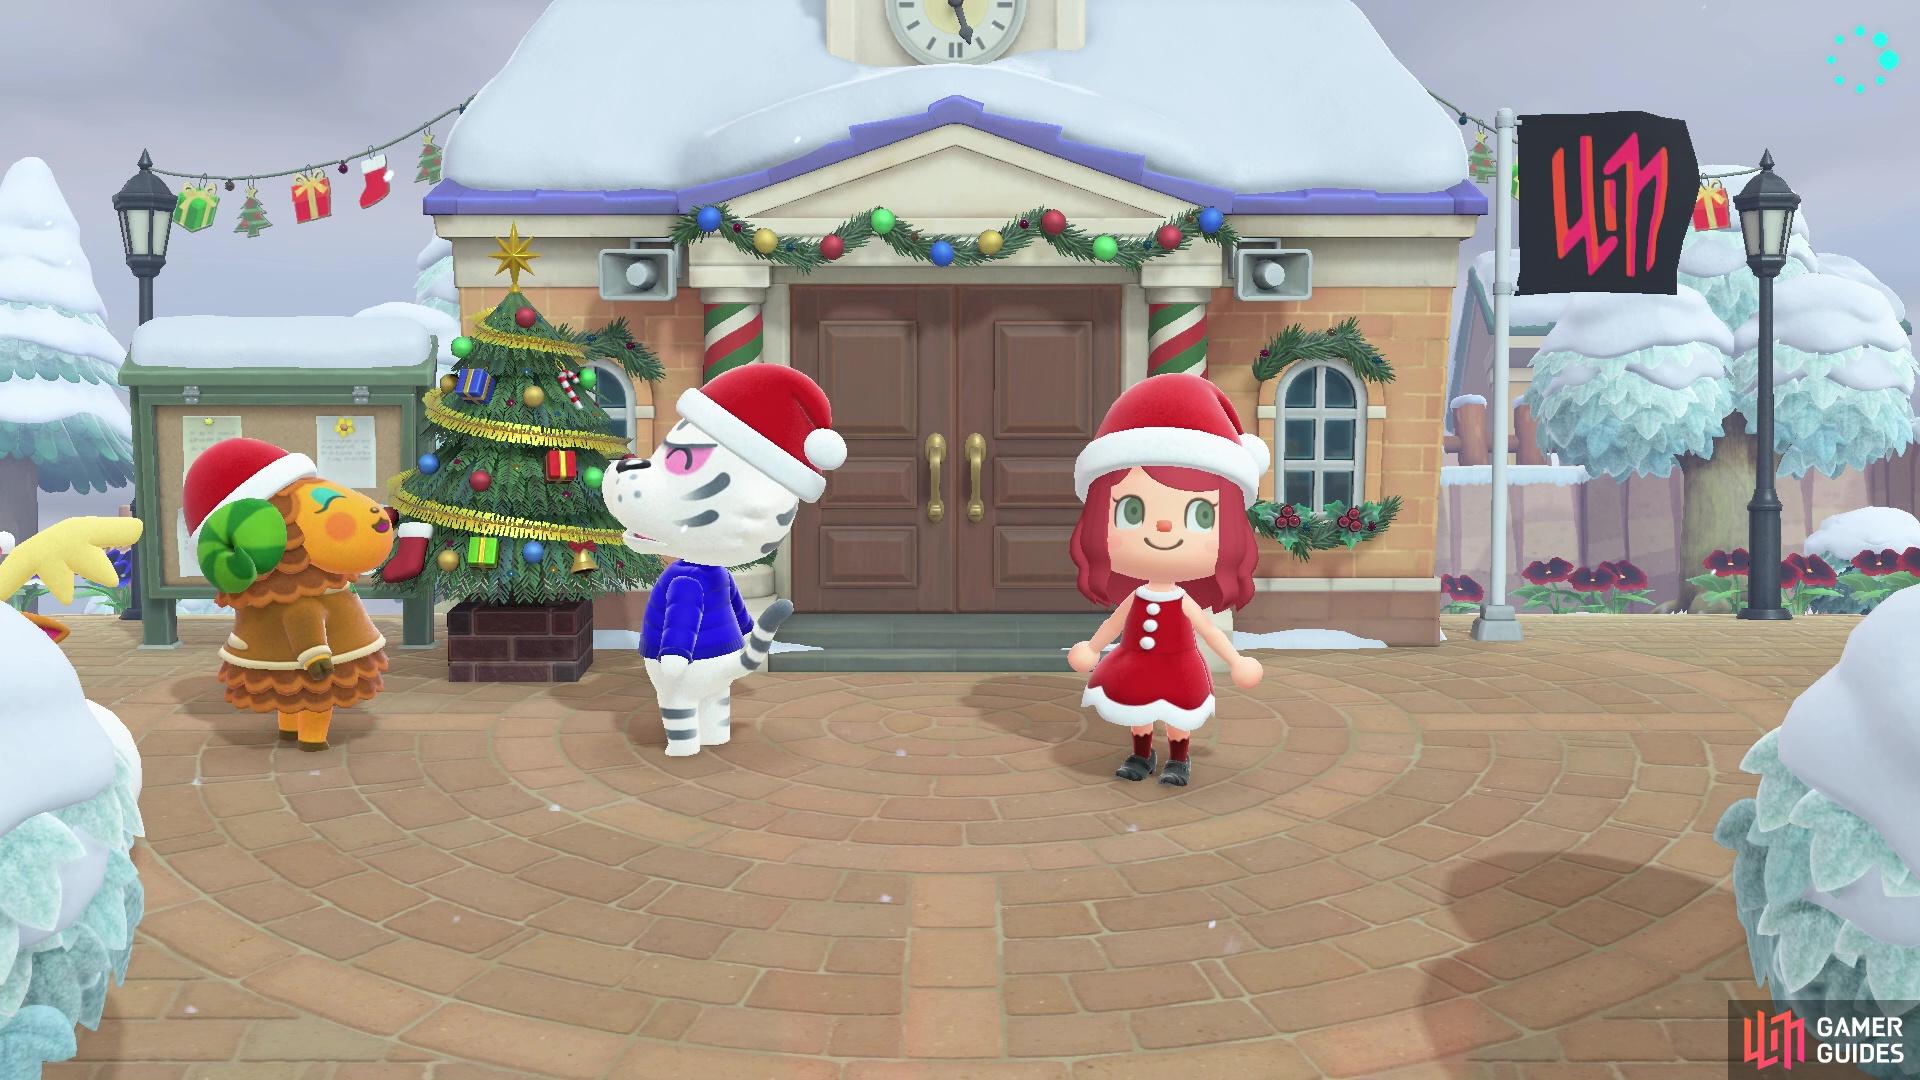 Christmas: Winter gaming updates for Roblox, Animal Crossing and more! -  BBC Newsround